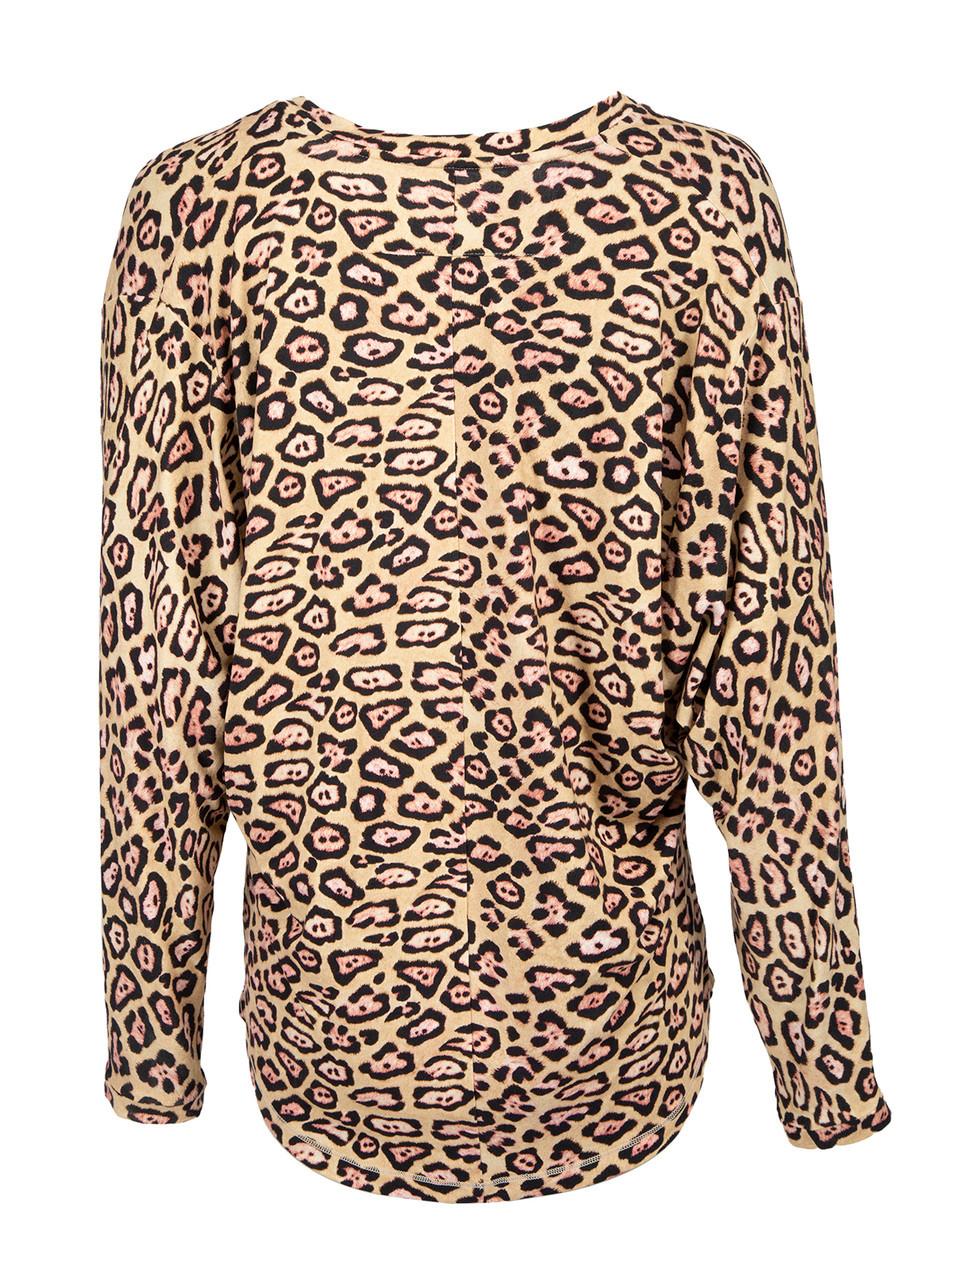 Givenchy Women's Leopard Print Long Sleeved Blouse In Excellent Condition For Sale In London, GB